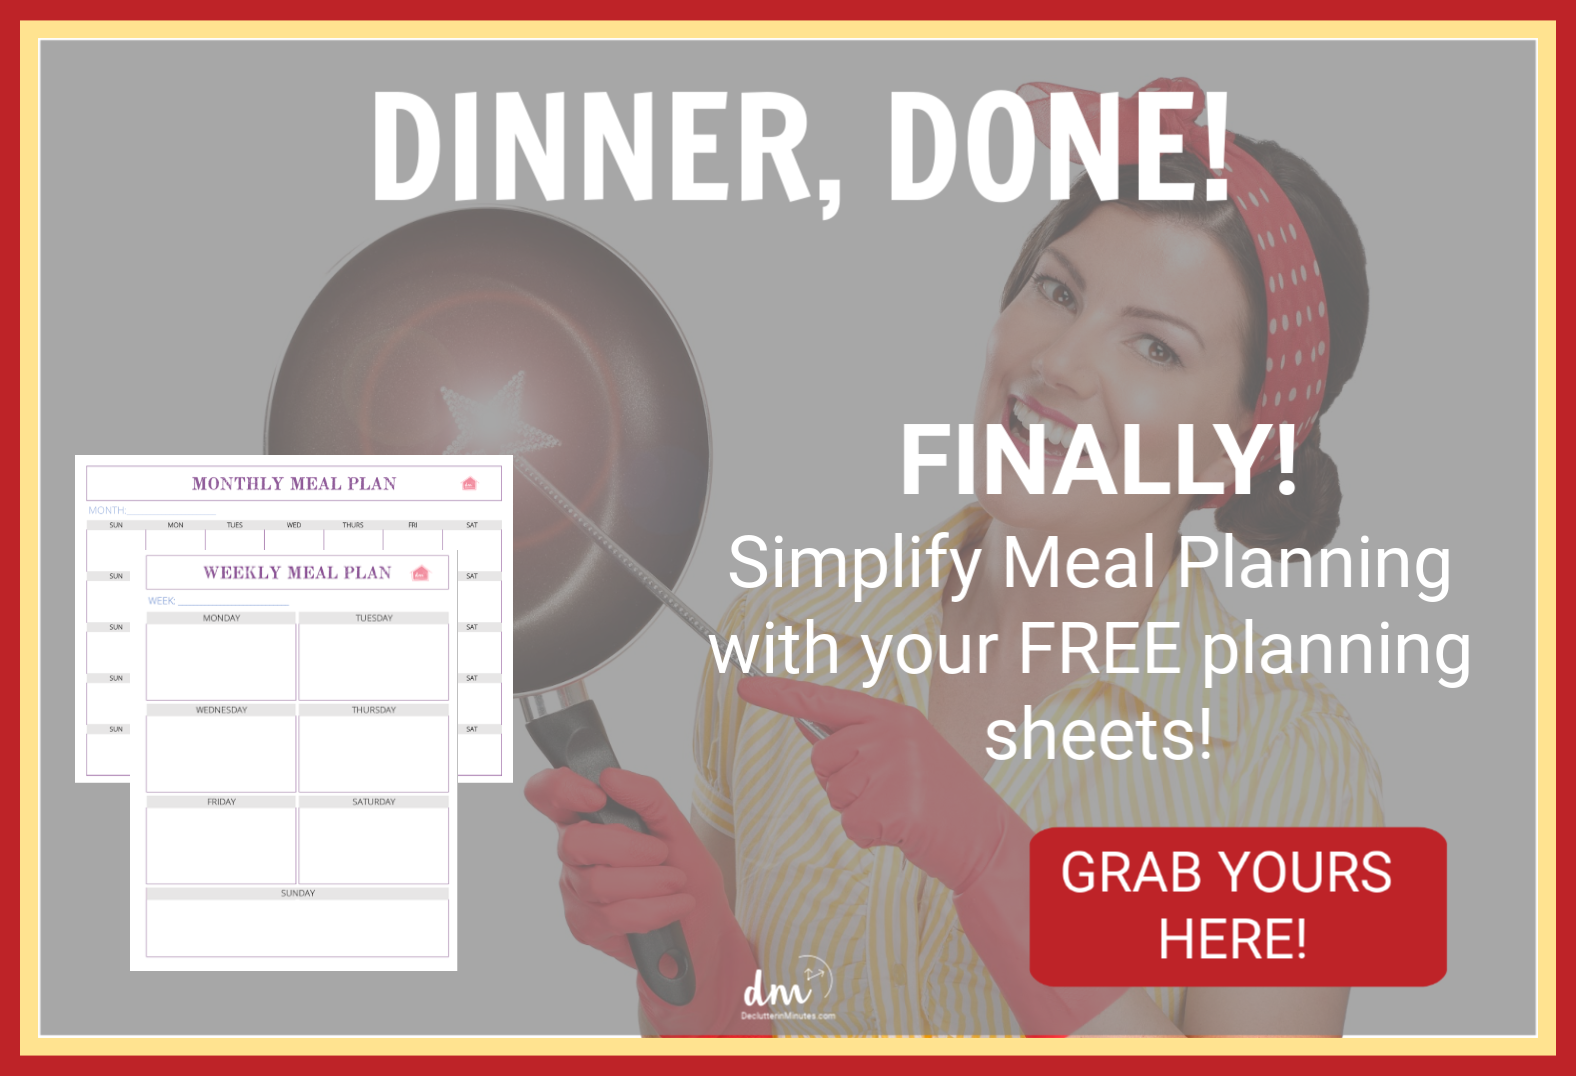 Finally, a way to simplify meal planning with these FREE planning sheets. Dinner done easy! 